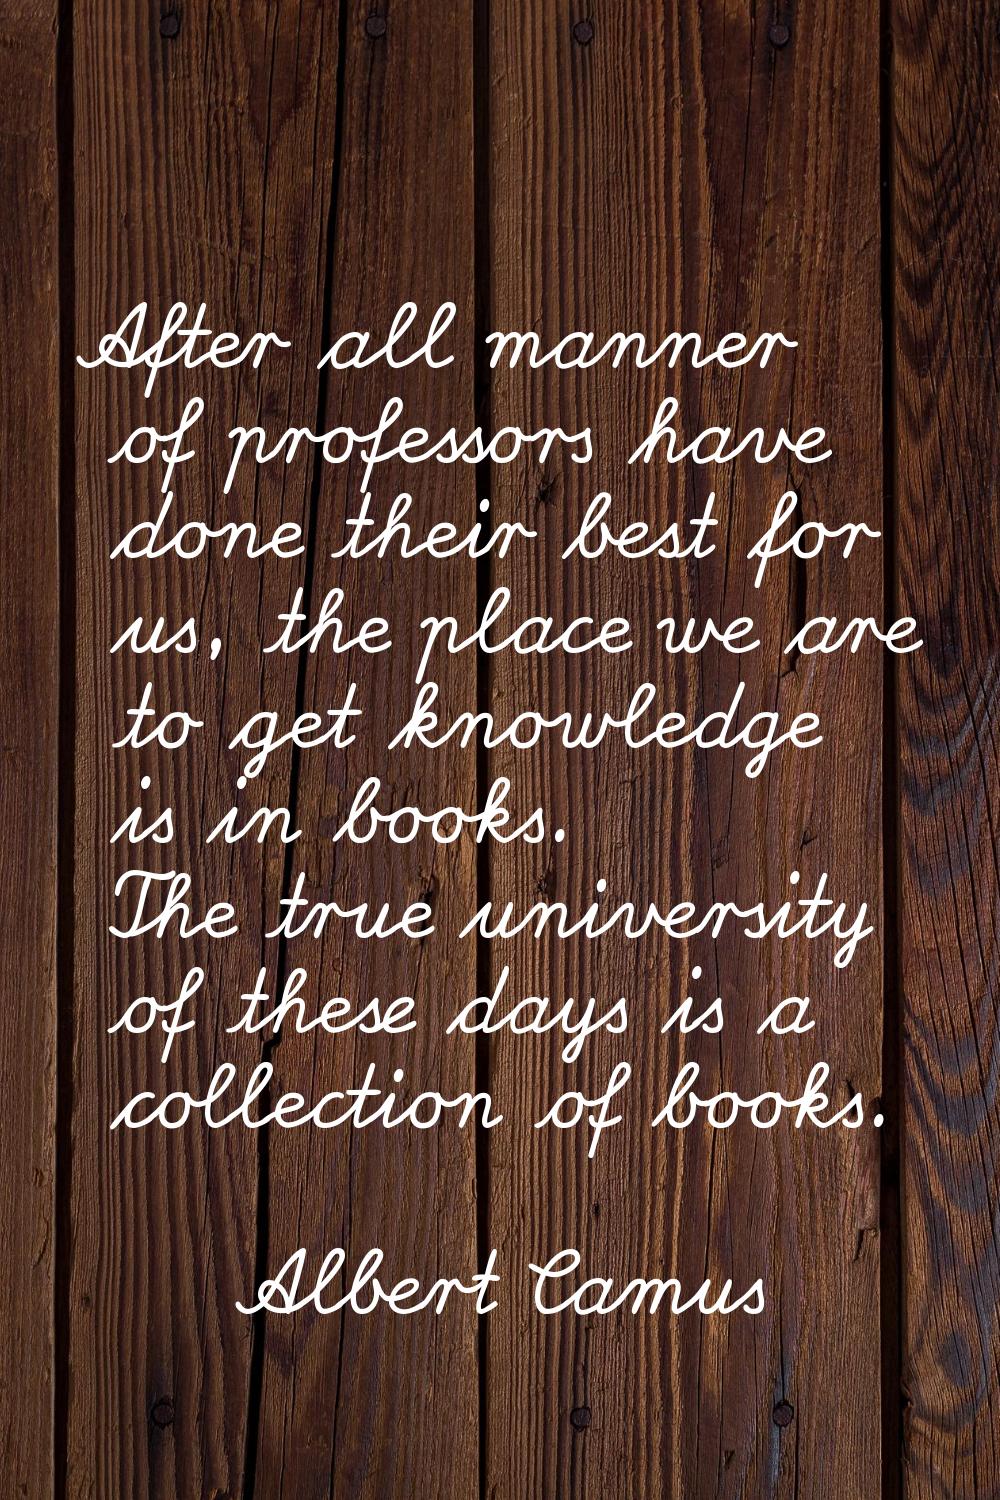 After all manner of professors have done their best for us, the place we are to get knowledge is in